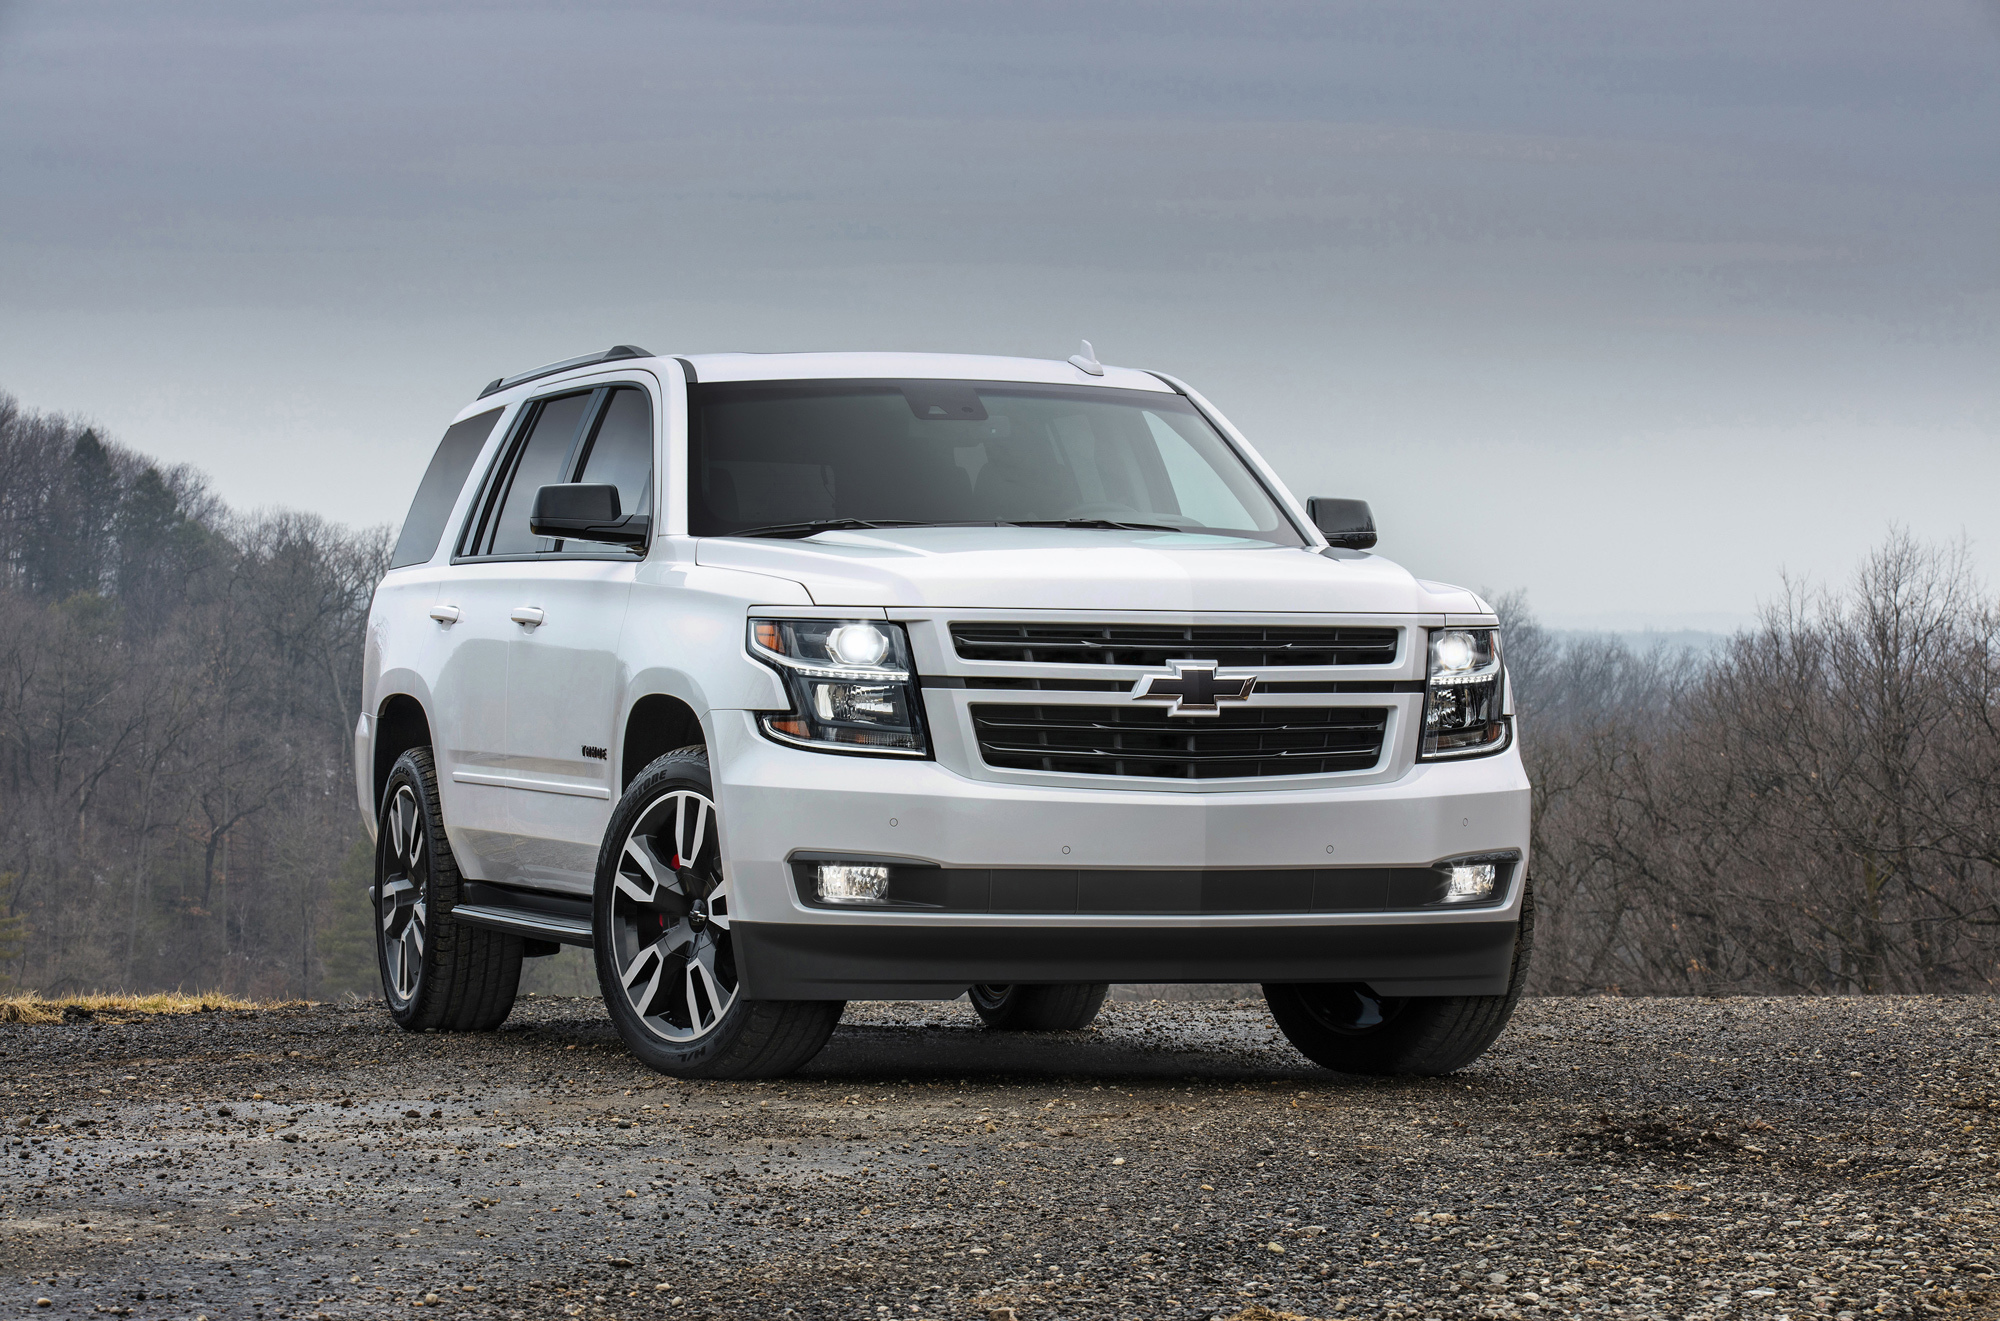 Chevrolet Tahoe Rst Wallpaper Image Photos Pictures Background